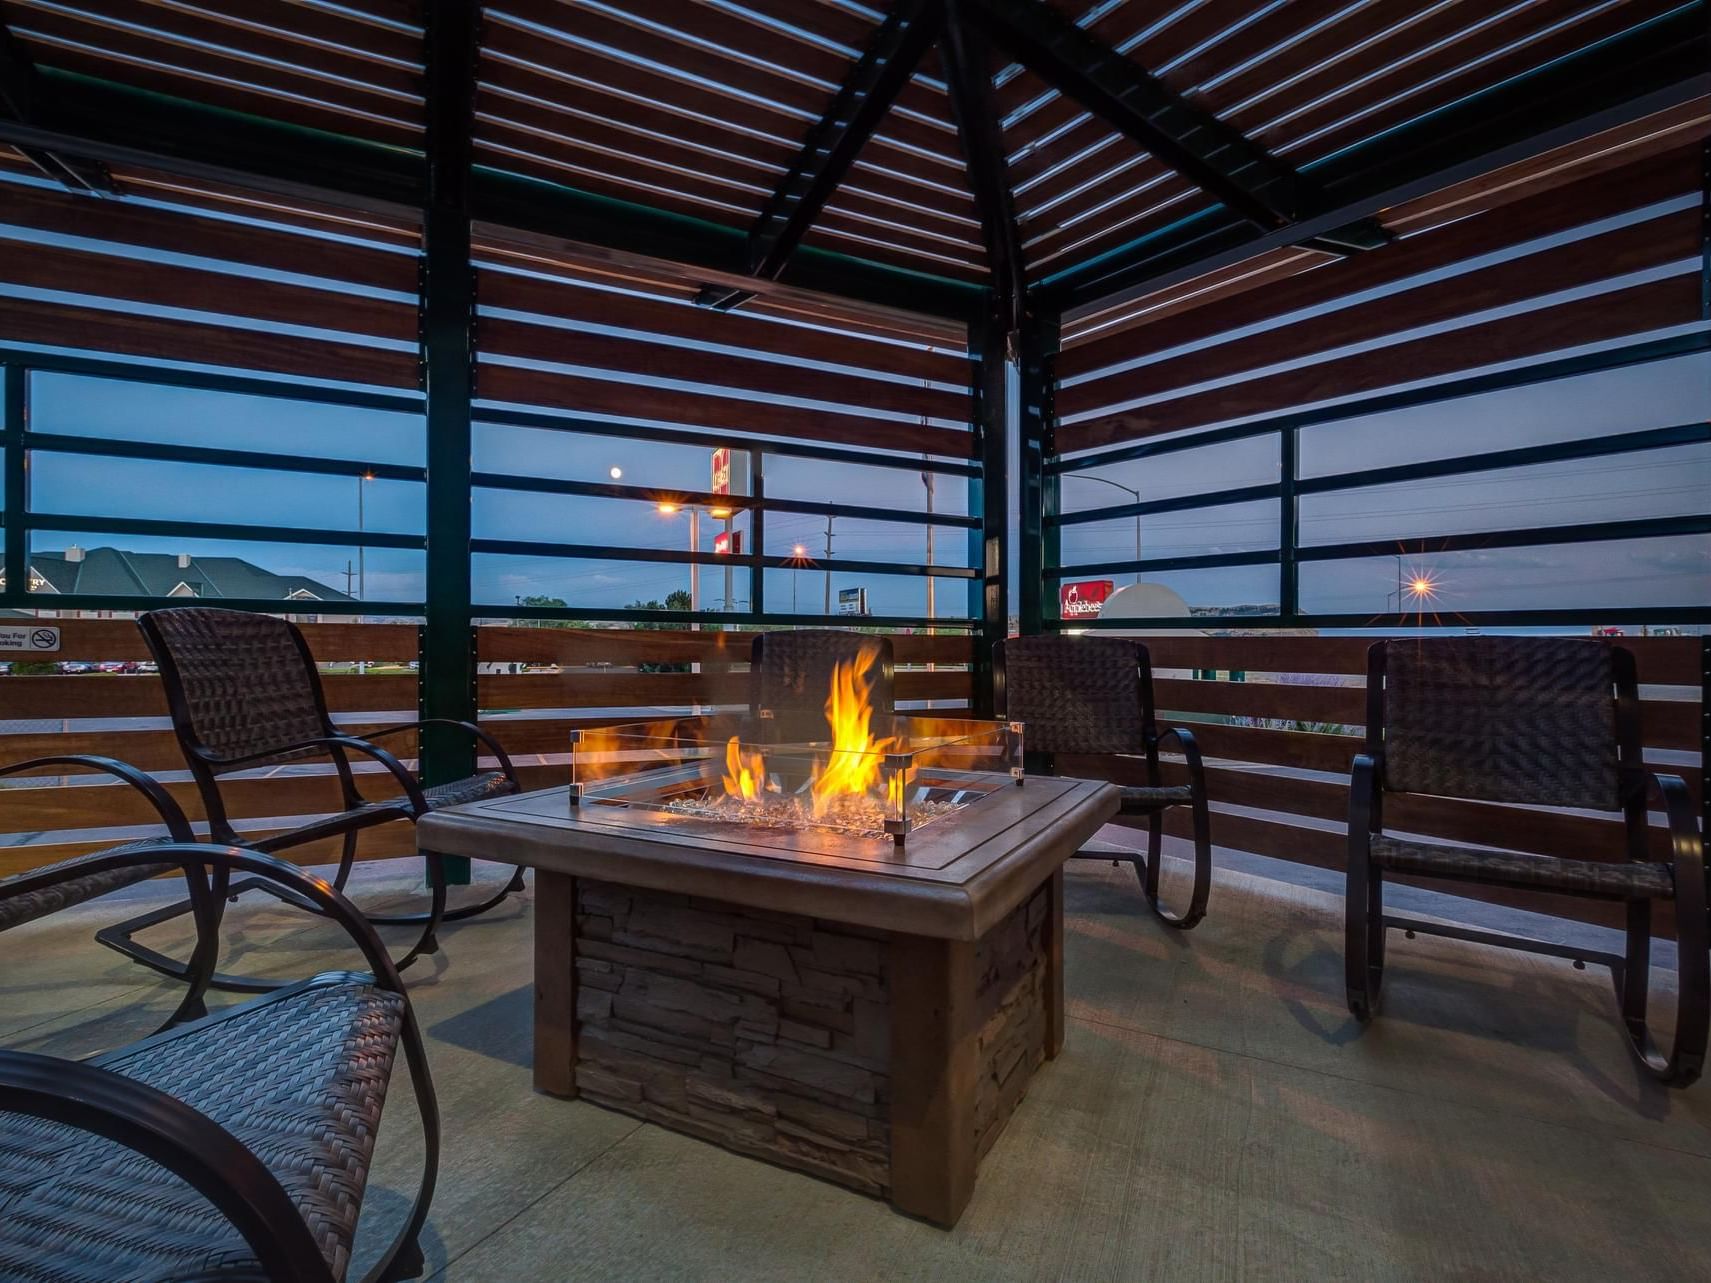 Dining & lounge area on the Patio with a firepit at night near Boothill Inn & Suites